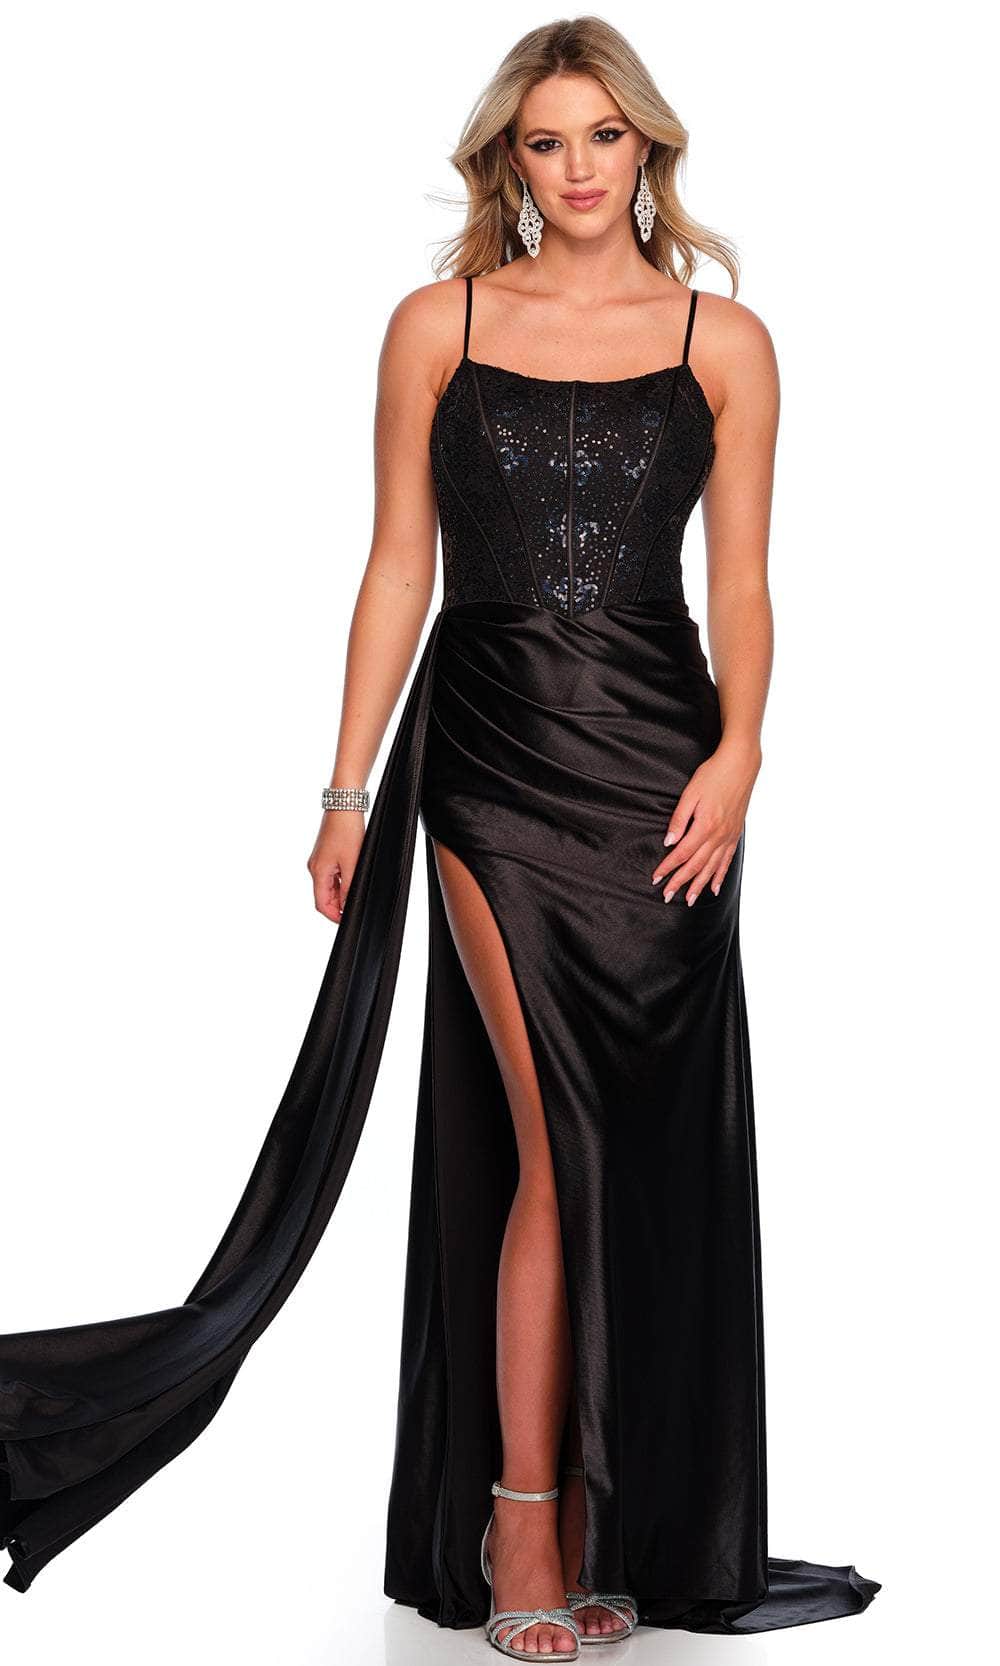 Image of Dave & Johnny 11458 - Sequin Corset Bodice Prom Gown